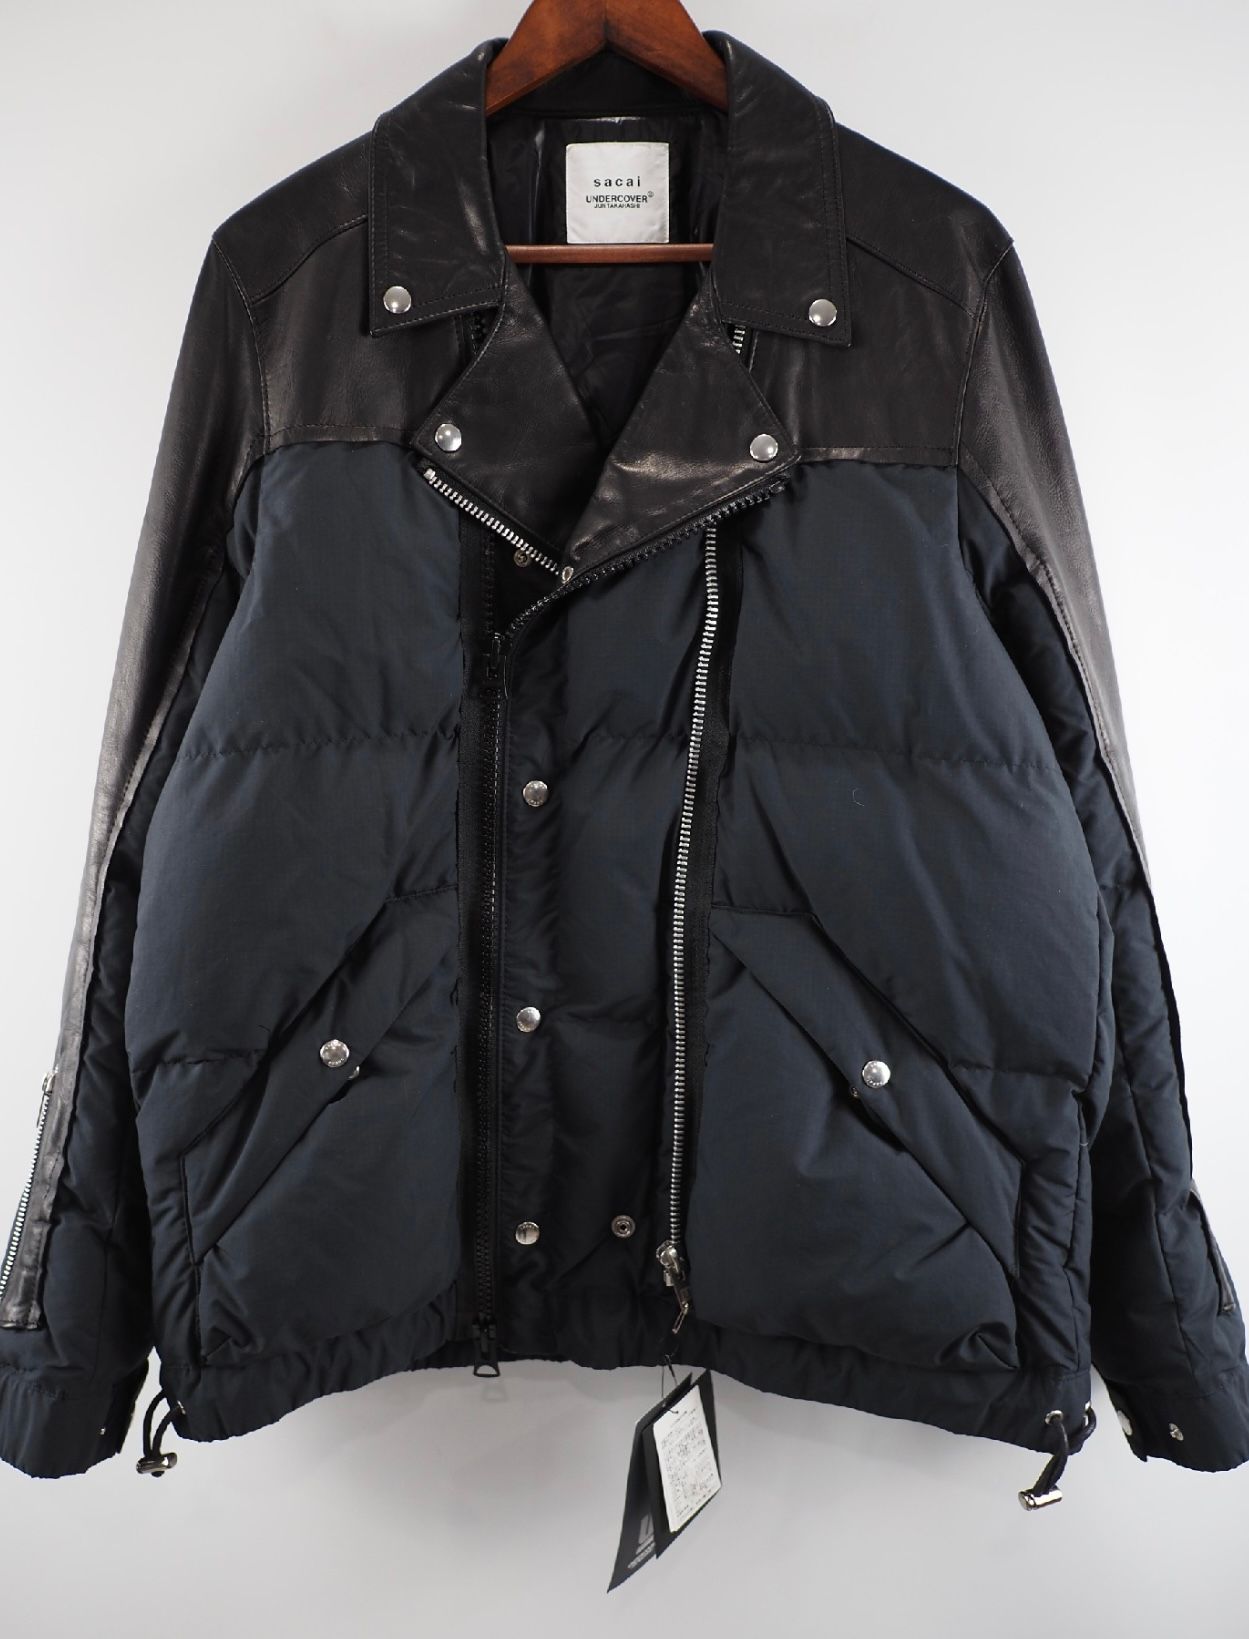 Sacai x Undercover Edition Leather Double Rider's Jacket - 2